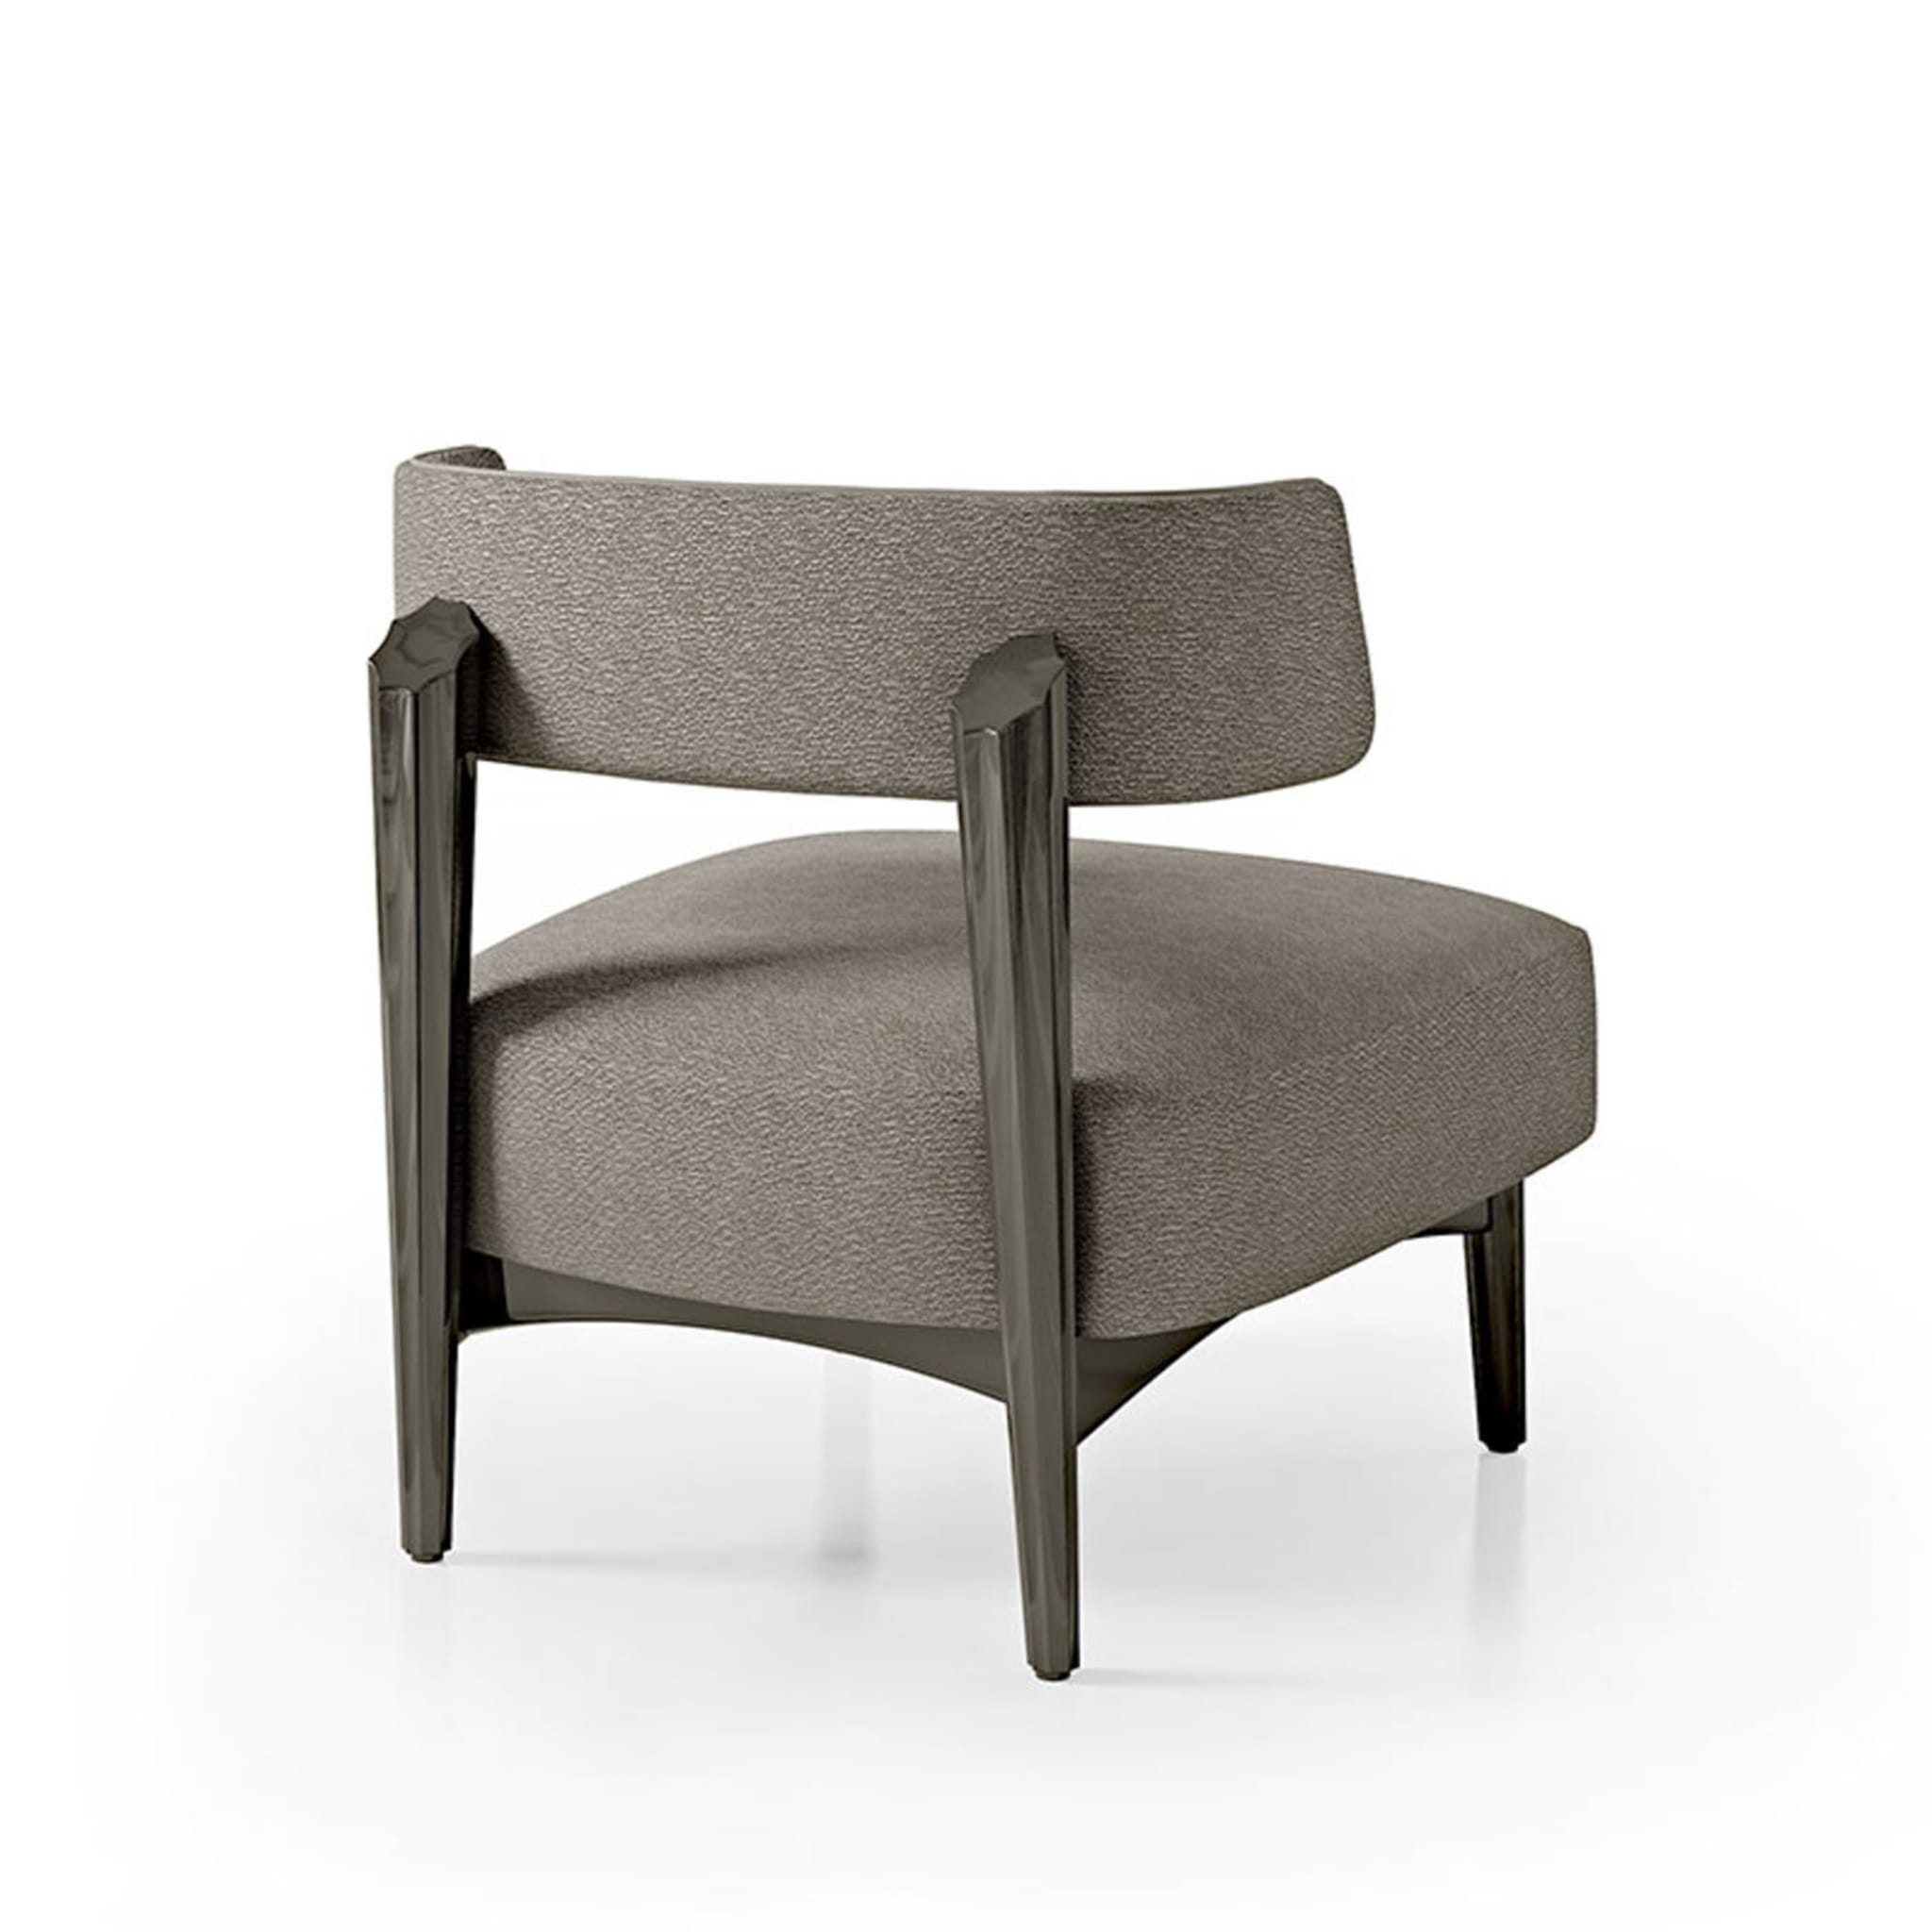 Claude Gray Lounge Chair - Alternative view 1